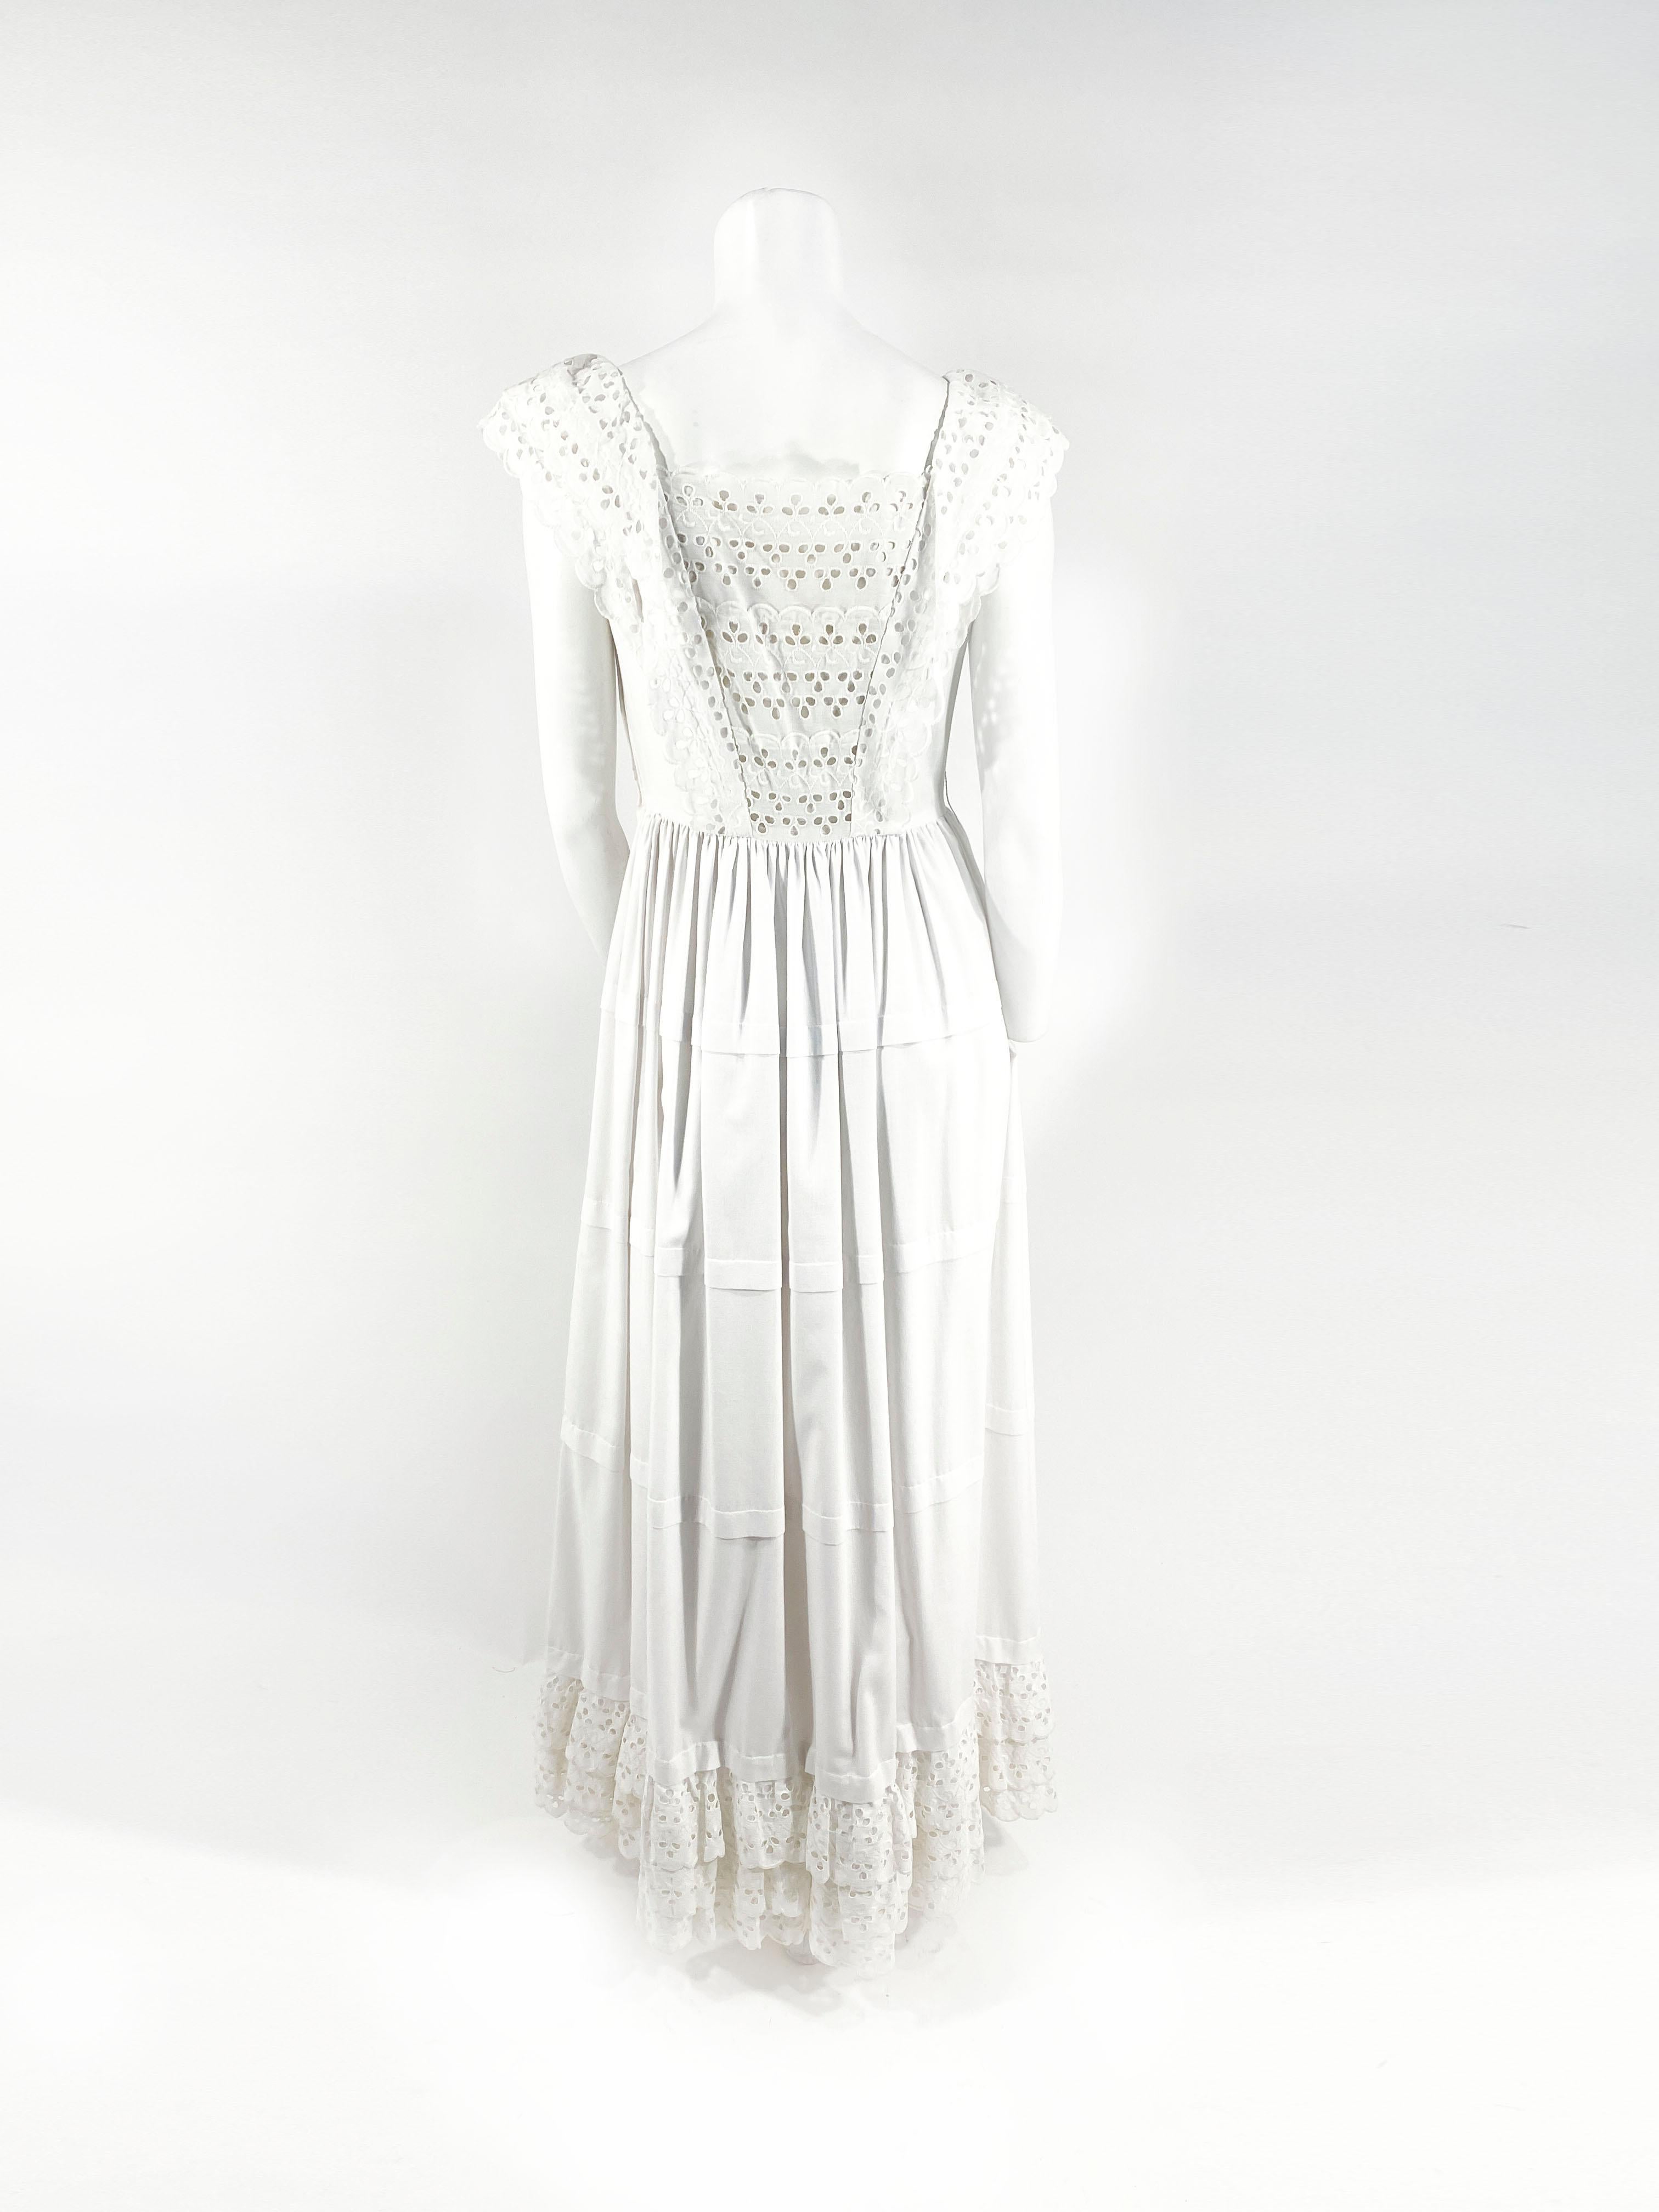 Women's 1970s White Cotton Eyelet Cottage Dress For Sale